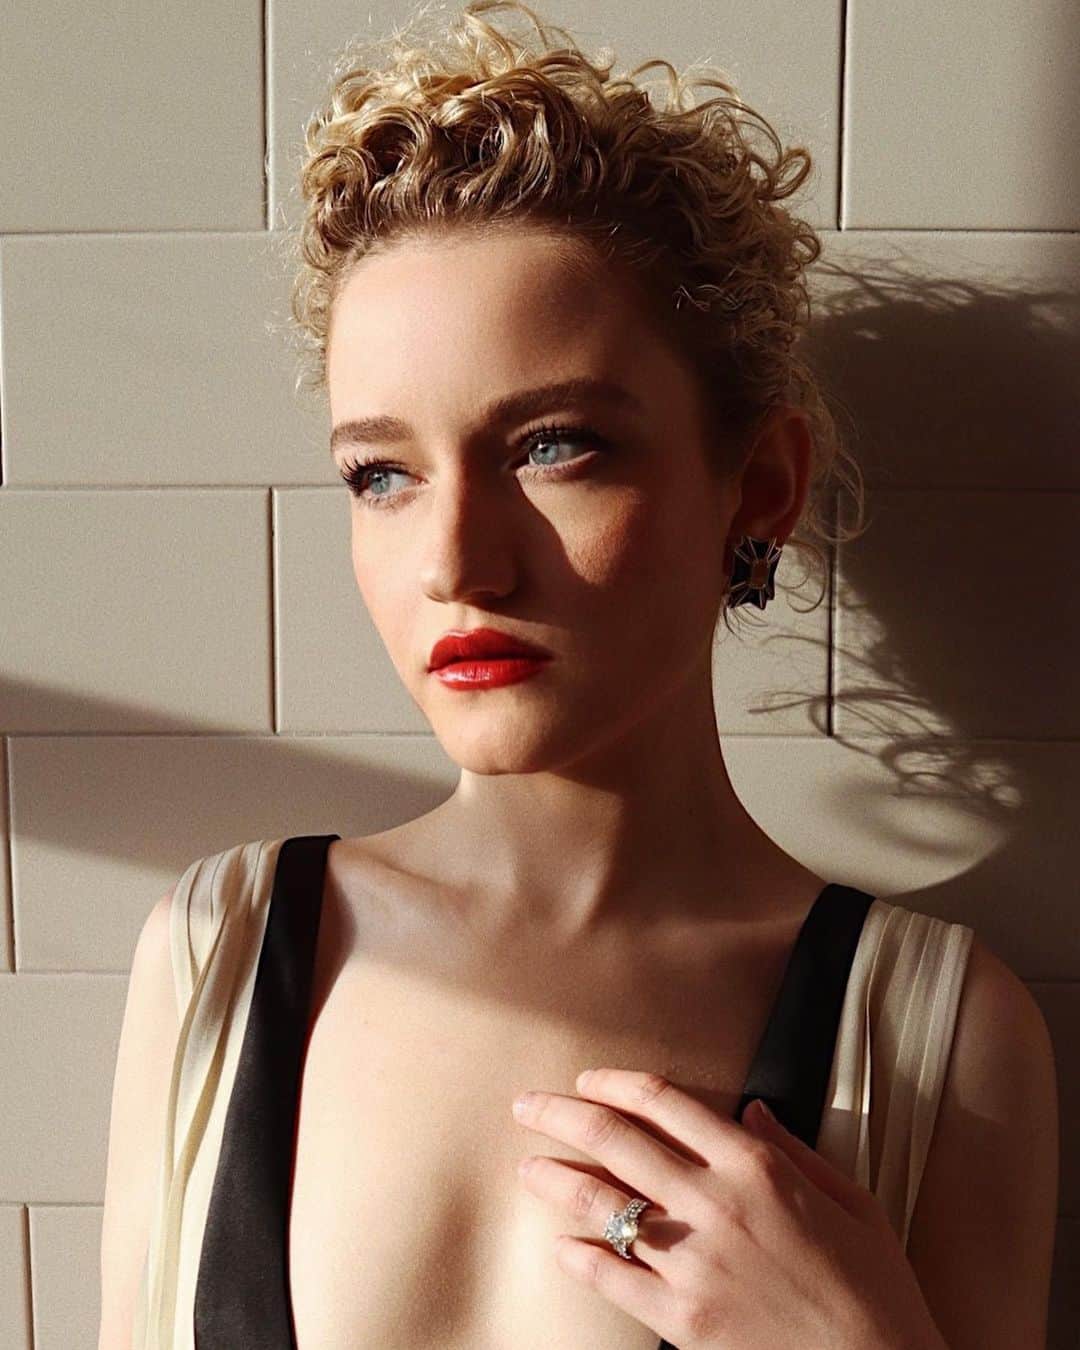 Hung Vanngoさんのインスタグラム写真 - (Hung VanngoInstagram)「#JuliaGarner (@juliagarnerofficial) for the #GoldenGlobes Awards this evening ❤️. Styling  @elizabethsaltzman  Nails @tony748474  Hair @bobbyeliot  Makeup @hungvanngo using @chanel.beauty @welovecoco  #welovecoco #WorkingWithChanel ❤️ Here is a full products breakdown:  SKIN PREP: Hydra Beauty Nourishing Lip Care Hydra Beauty Micro Serum Intense Replenishing Hydration Hydra Beauty Micro Gel Yeux Intense Smoothing Eye Gel Hydra Beauty Micro Creme Fortifying Replenishing Hydration  FACE: Le Beiges Healthy Glow Foundation Hydration and Longwear in shade BR22 Le Correcteur De Chanel Longwear Concealer in shade 10 Le Beiges Healthy Glow Bronzing Cream (Soleil Tan Bronze Universel) Le Beiges Healthy Glow Sheer Powder in shade 20 Baume Essentiel in shade Printanier Fleurs De Printemps Blush and Highlighter Duo  EYEBROWS: Crayon Sourcils in 10 Blond Cendre Le Gel Sourcils in 350 Transparent  EYES: La Base Ombre Q Paupieres Longwear Eyeshadow Primer Ombré Premiere Longwear Cream Shadow in shades 844 Gemme Doree and 840 Patine Bronze Stylo Yeux Waterproof Long Lasting Eyeliner in shade 932 Noir Petrole Le Volume De Chanel Mascara in shade 10 Noir  LIPS Rouge CoCo Bloom in shade 134 Sunlight (Waitlist is now open on redcarpeybeauty.Chanel.com! ❤️)」3月1日 11時27分 - hungvanngo